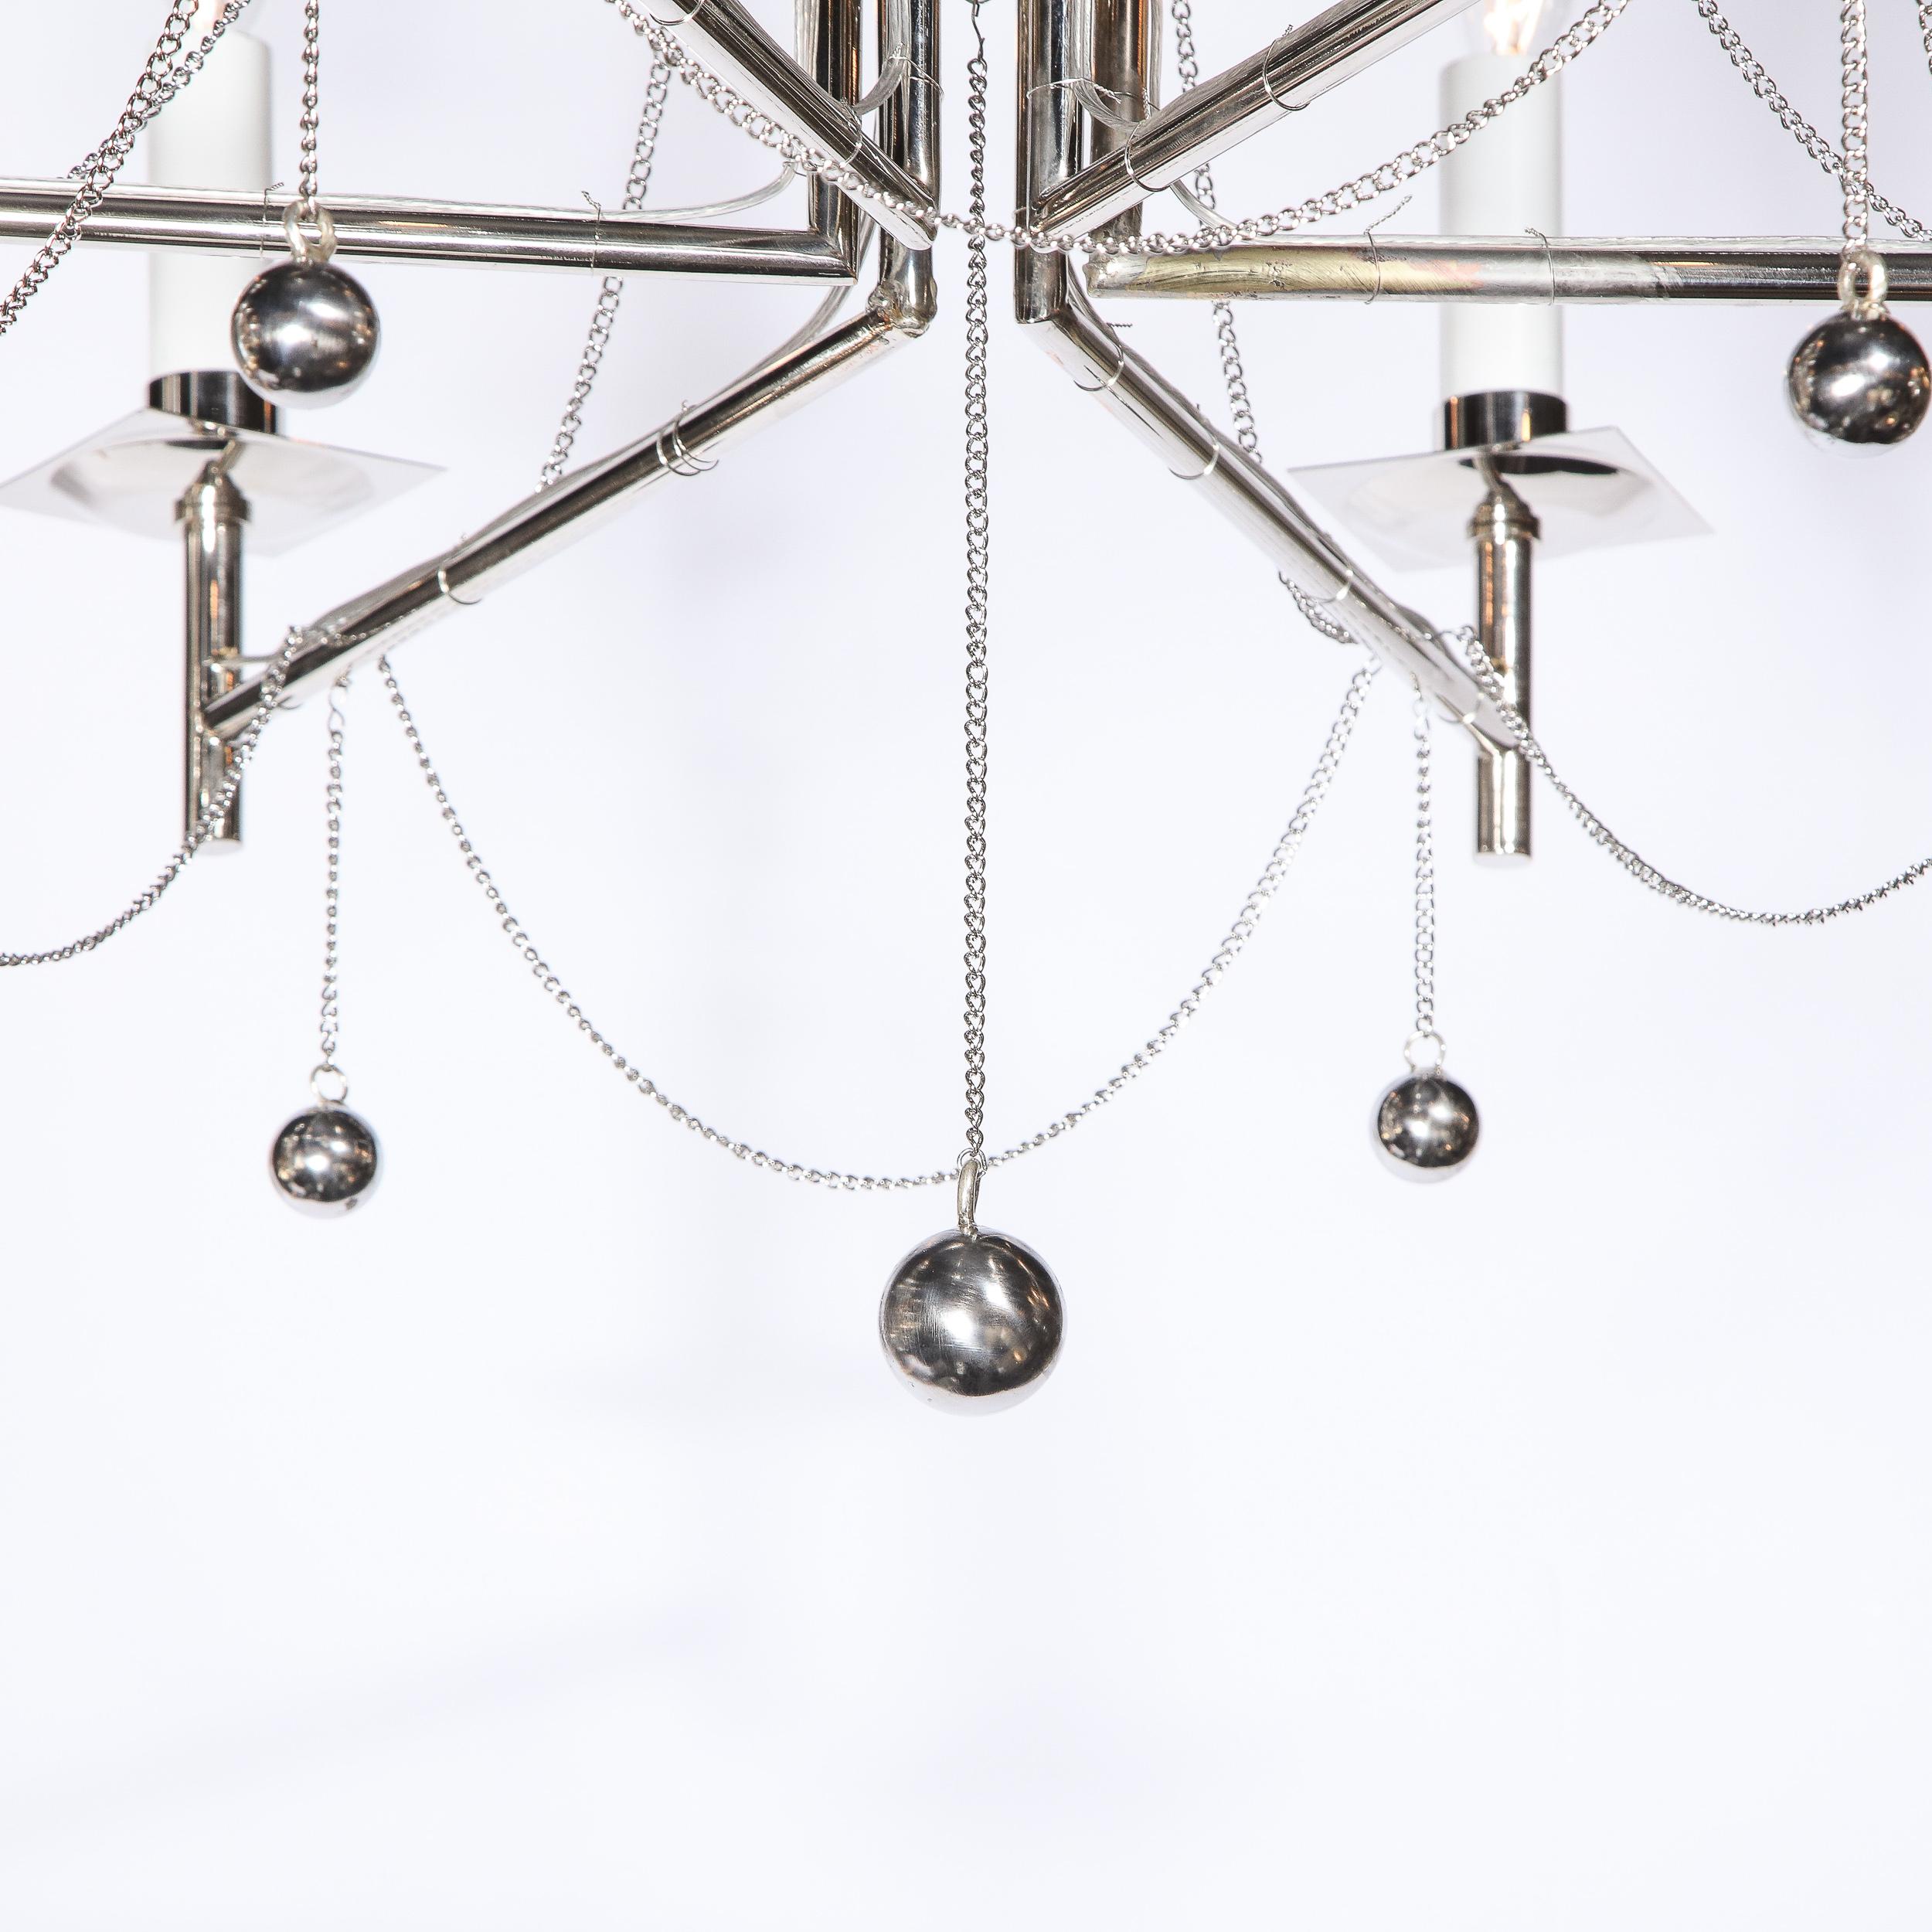 American Modernist Polished Nickel Six Arm Chandelier with Chain and Spherical Details For Sale